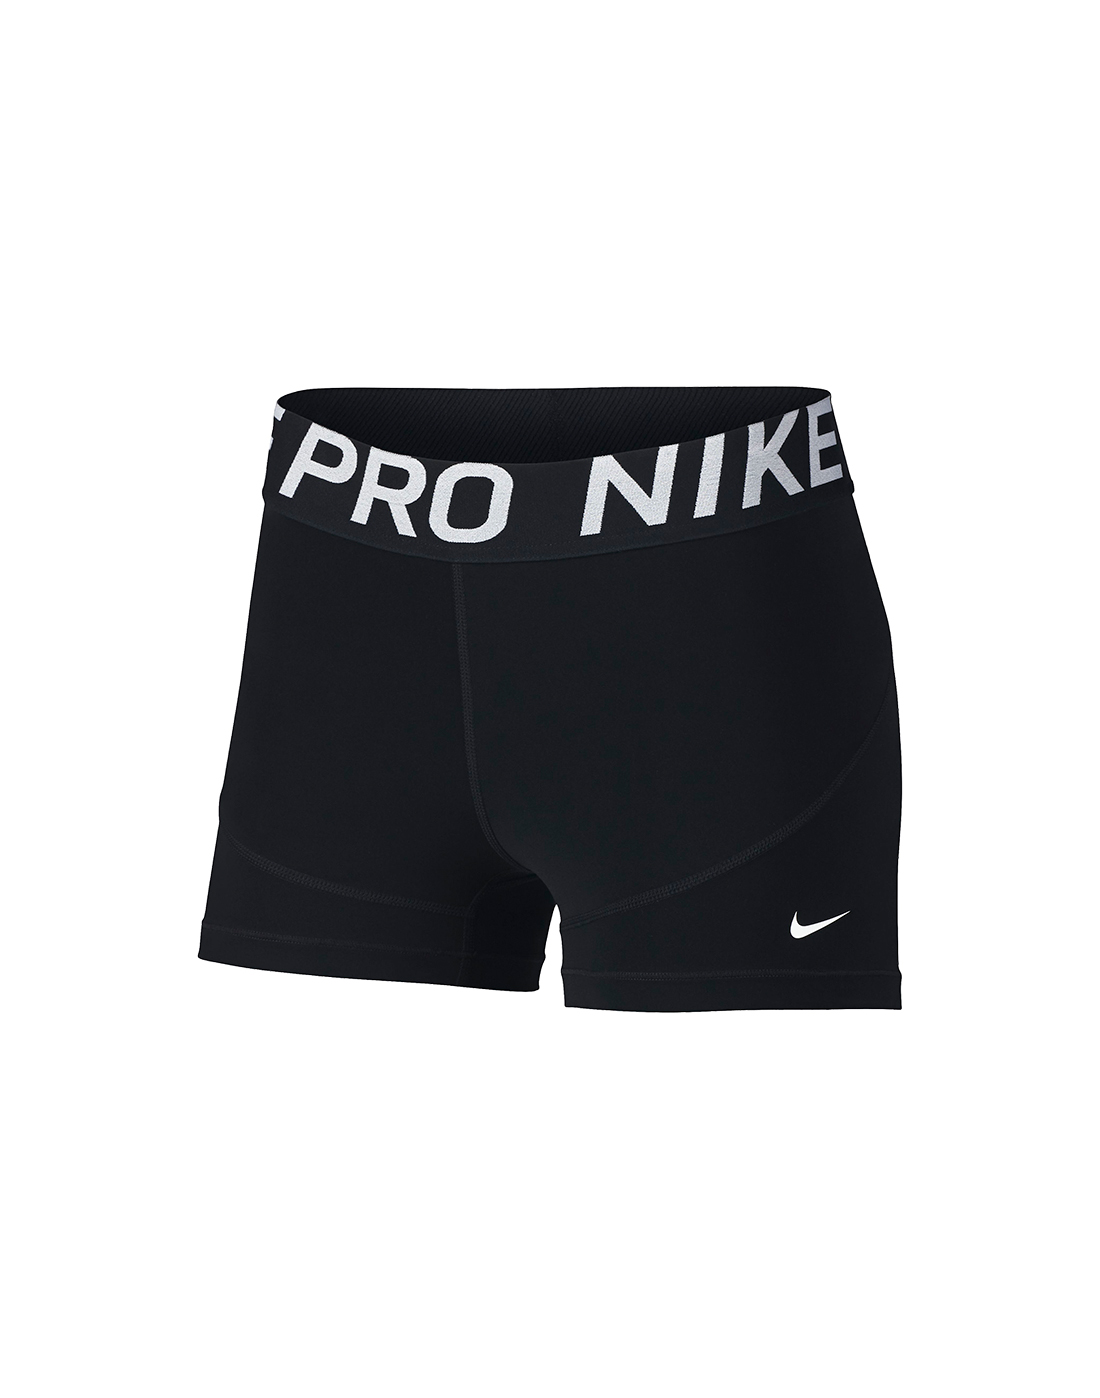 nike short tights for ladies